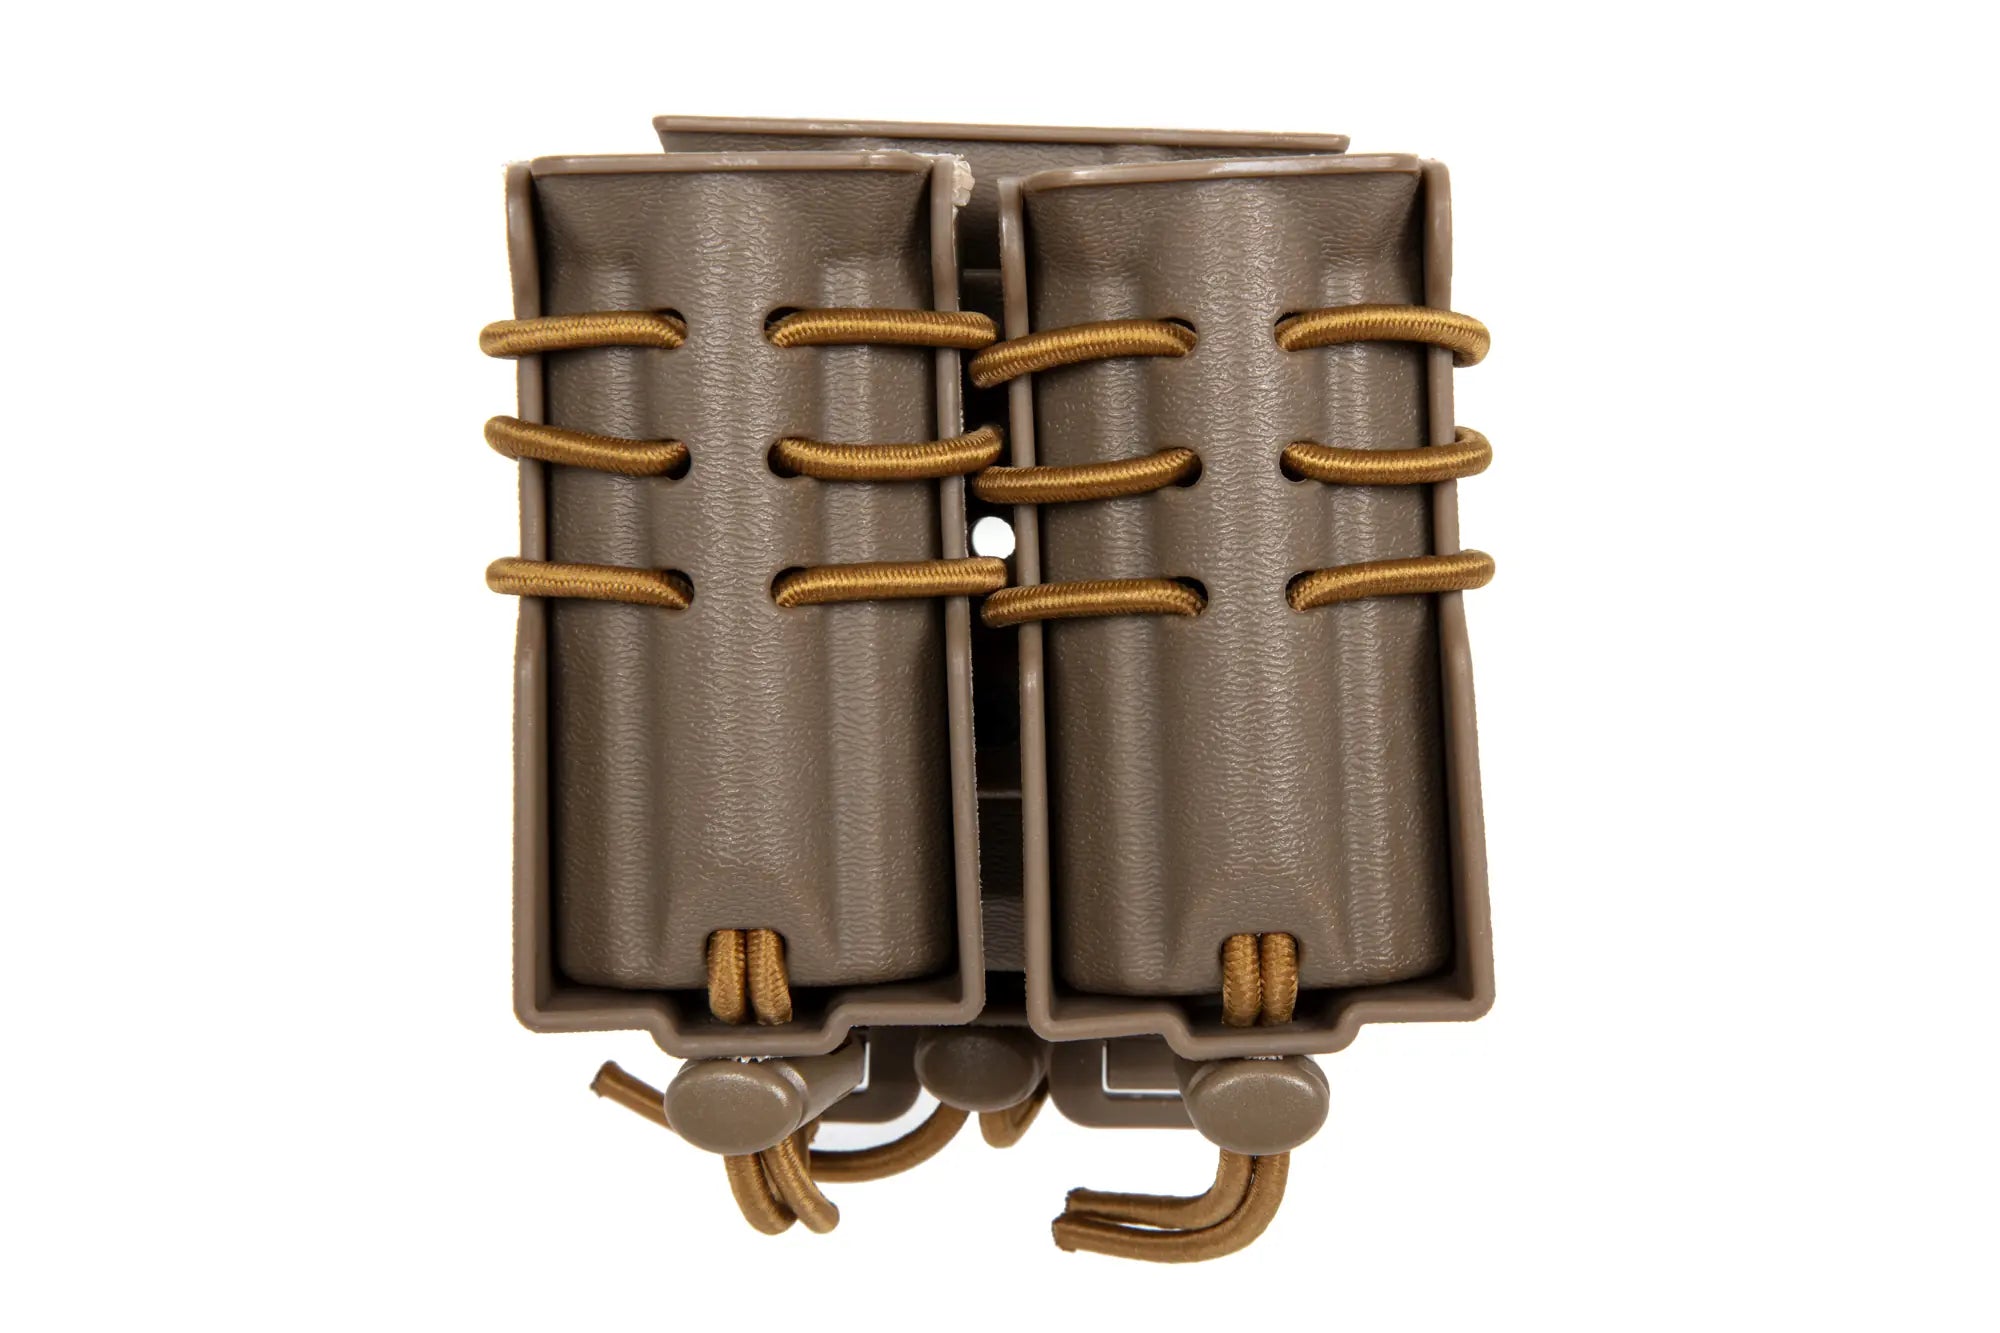 Carrier for 2 9mm magazines and an M4/M16 magazine Wosport Urban Assault Quick Pull Tan-2